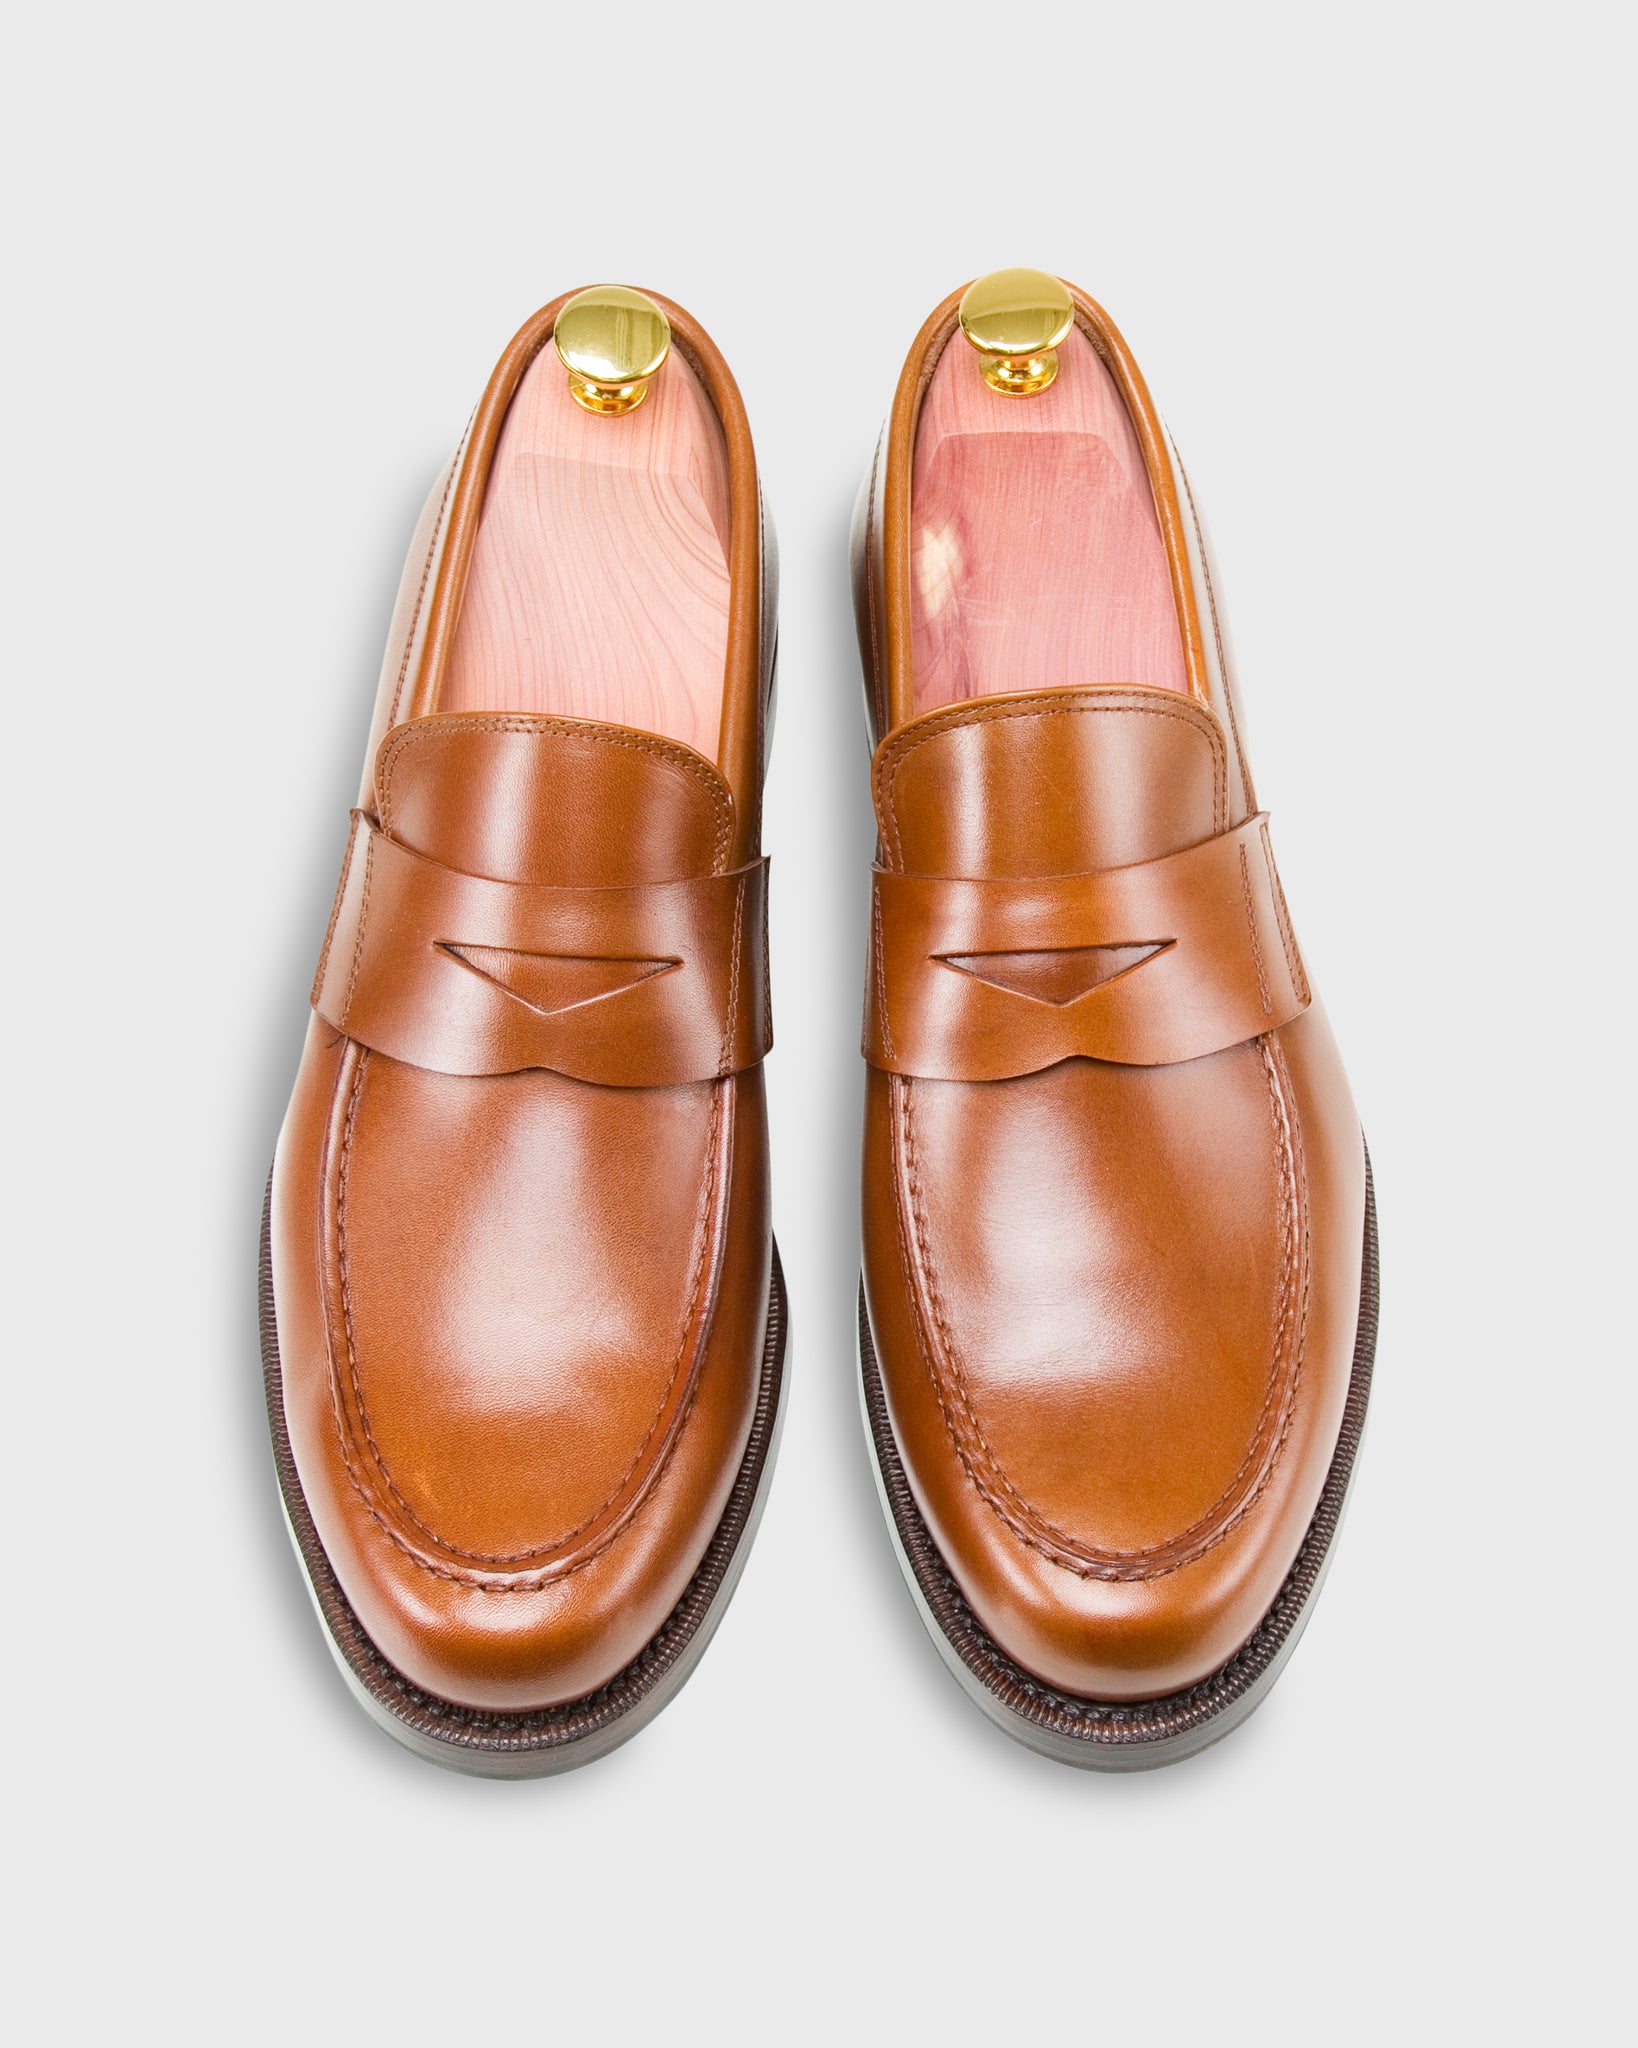 Weltline Penny Loafers Tan Calf, 52% OFF